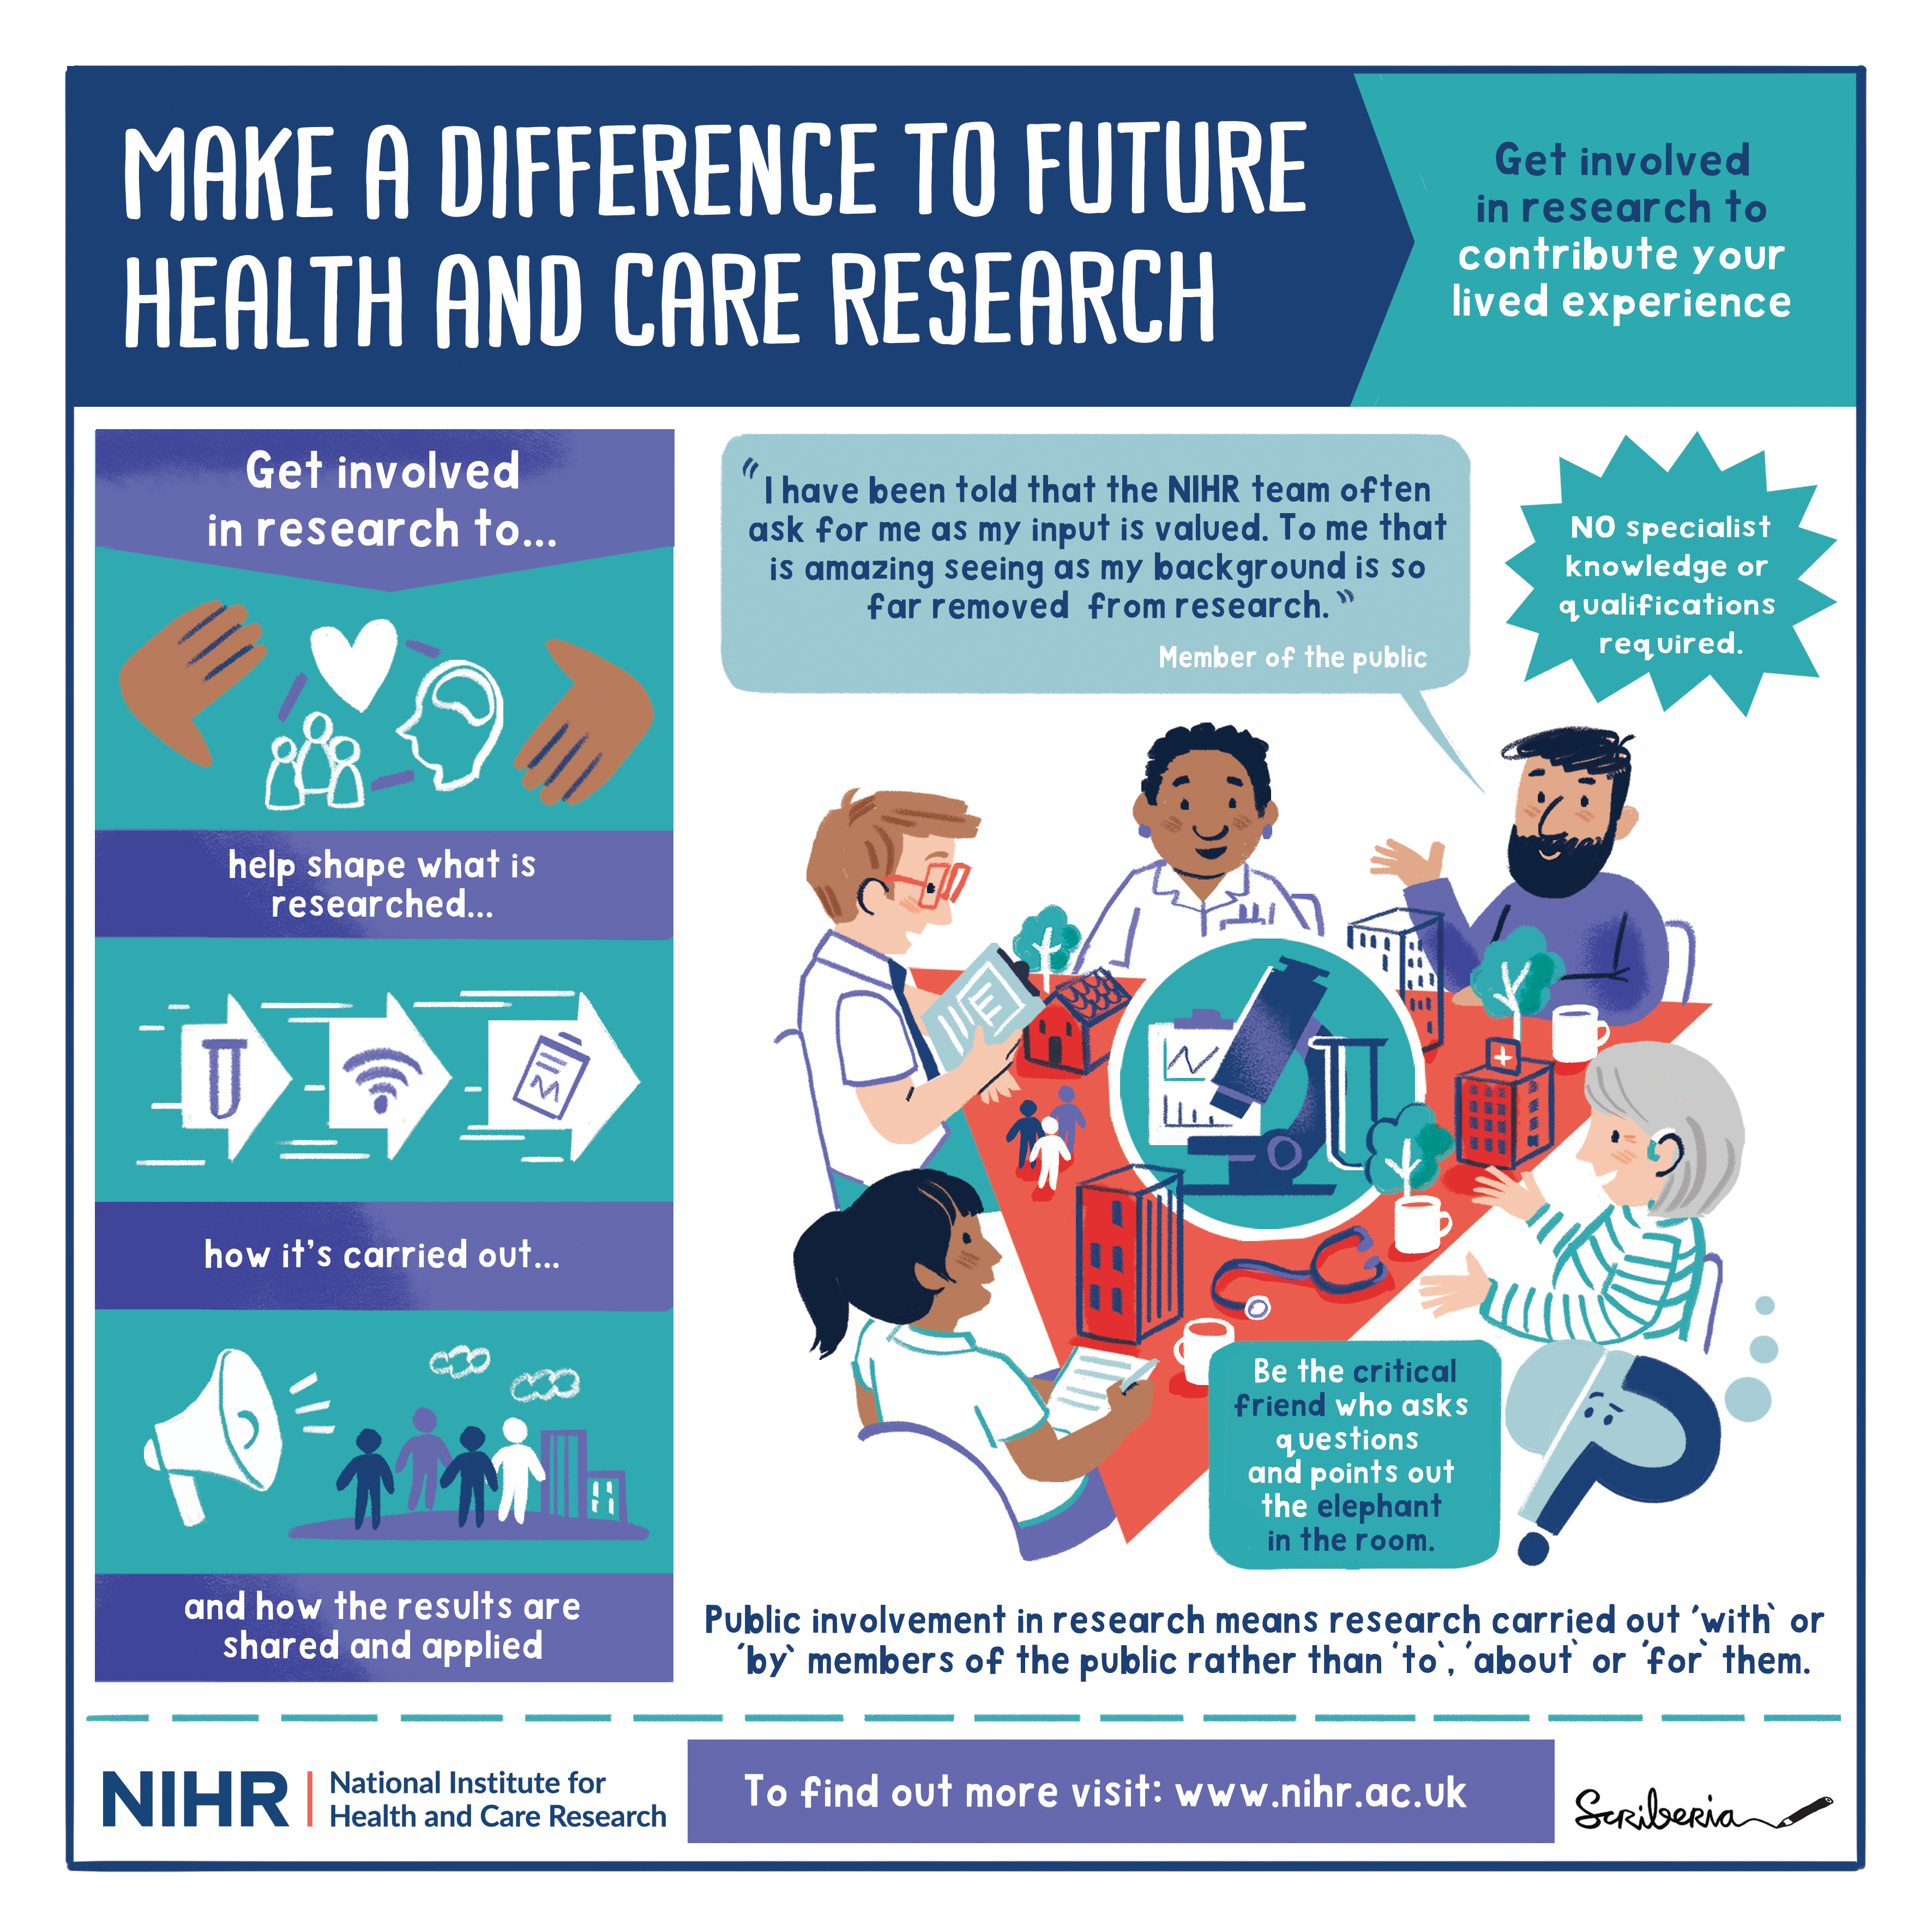 Starting out guide - why and how to get involved in research | NIHR